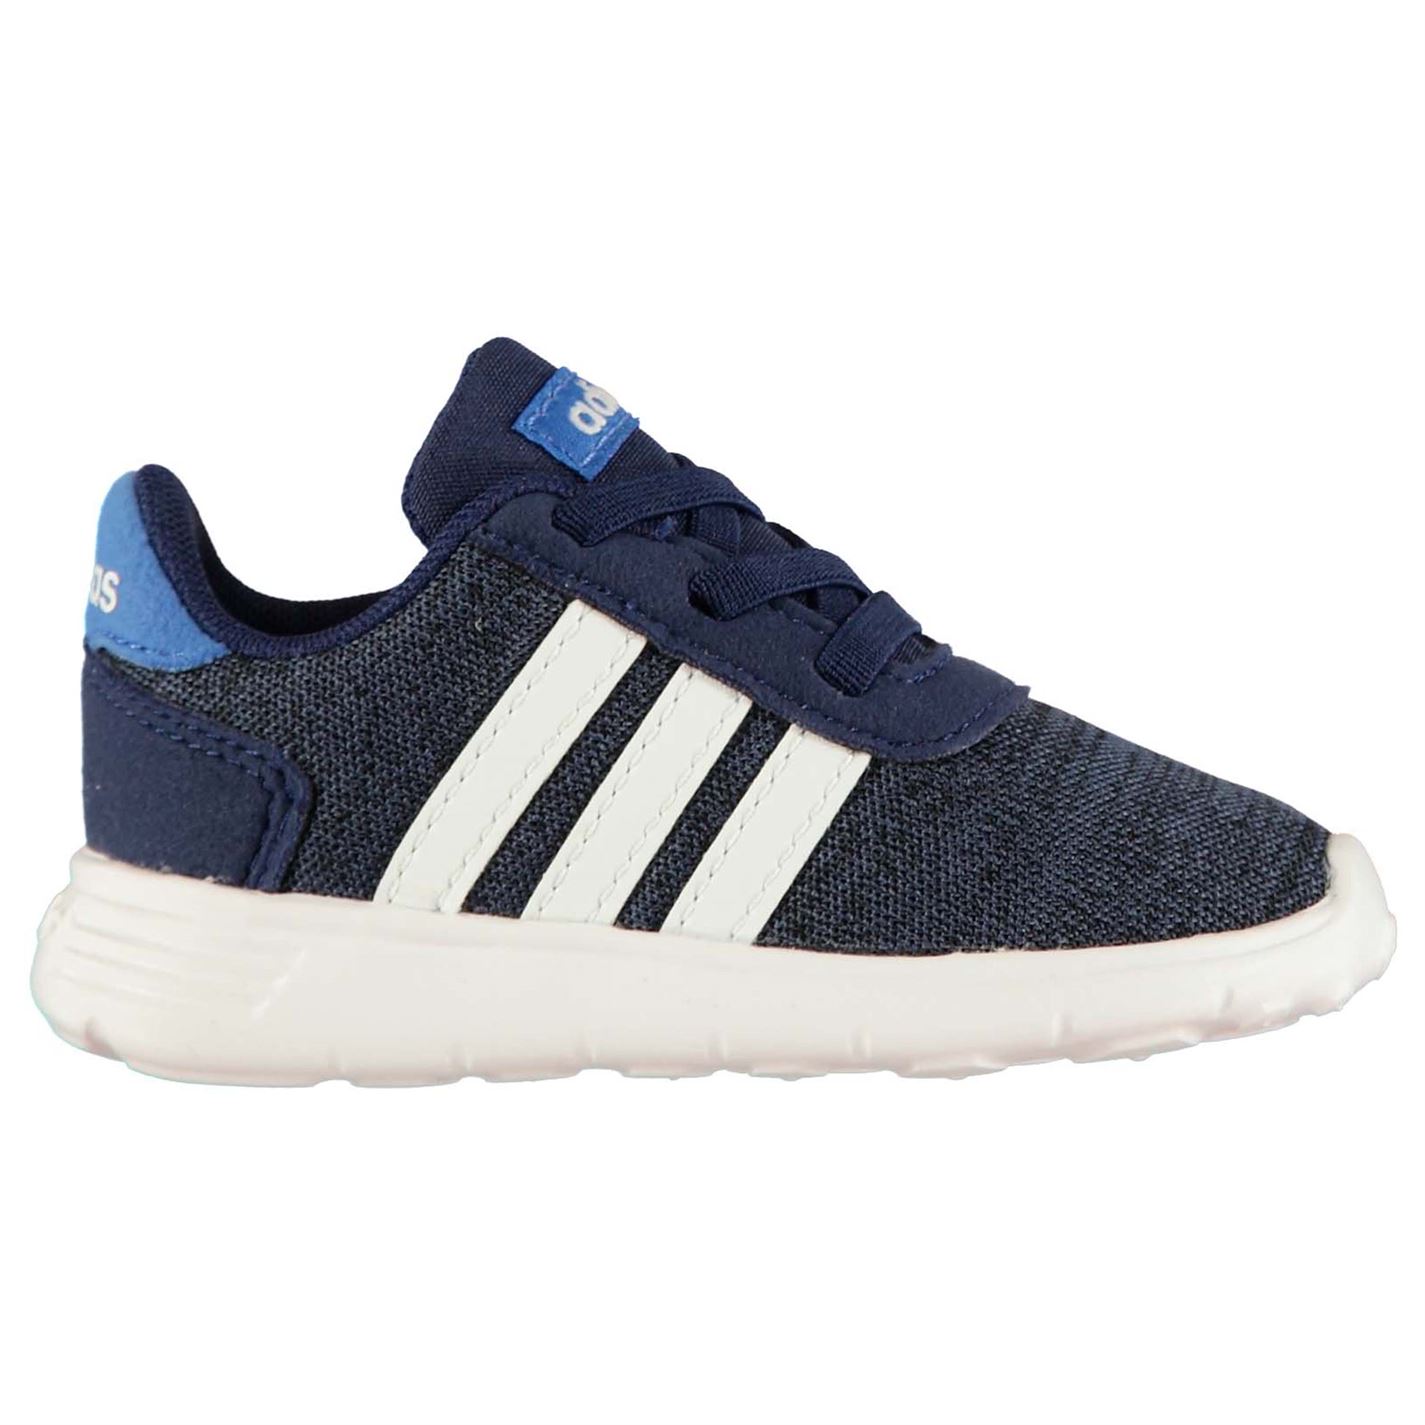 Adidas Lite Racer Infant Boys Trainers